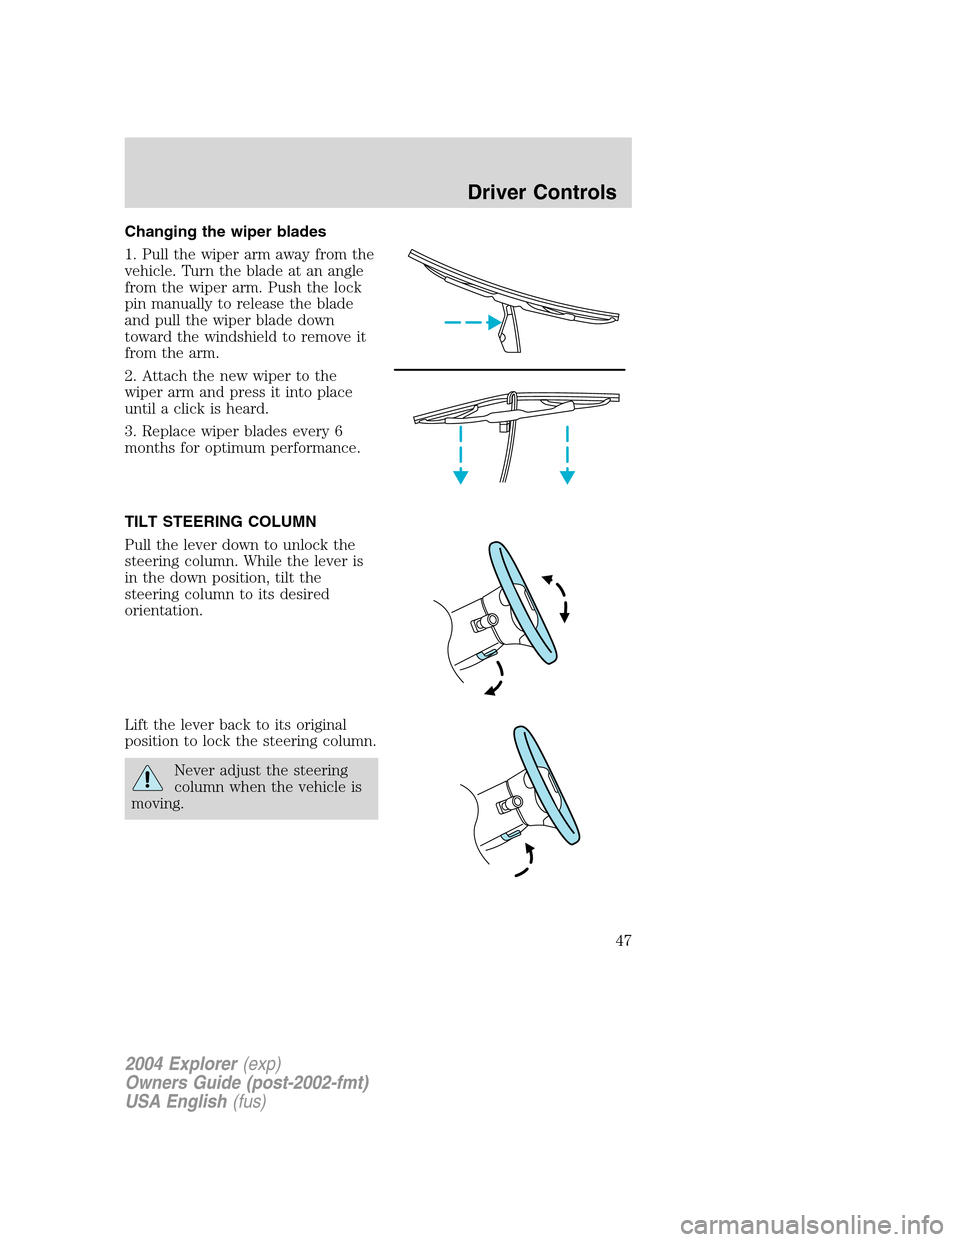 FORD EXPLORER 2004 3.G Service Manual Changing the wiper blades
1. Pull the wiper arm away from the
vehicle. Turn the blade at an angle
from the wiper arm. Push the lock
pin manually to release the blade
and pull the wiper blade down
towa